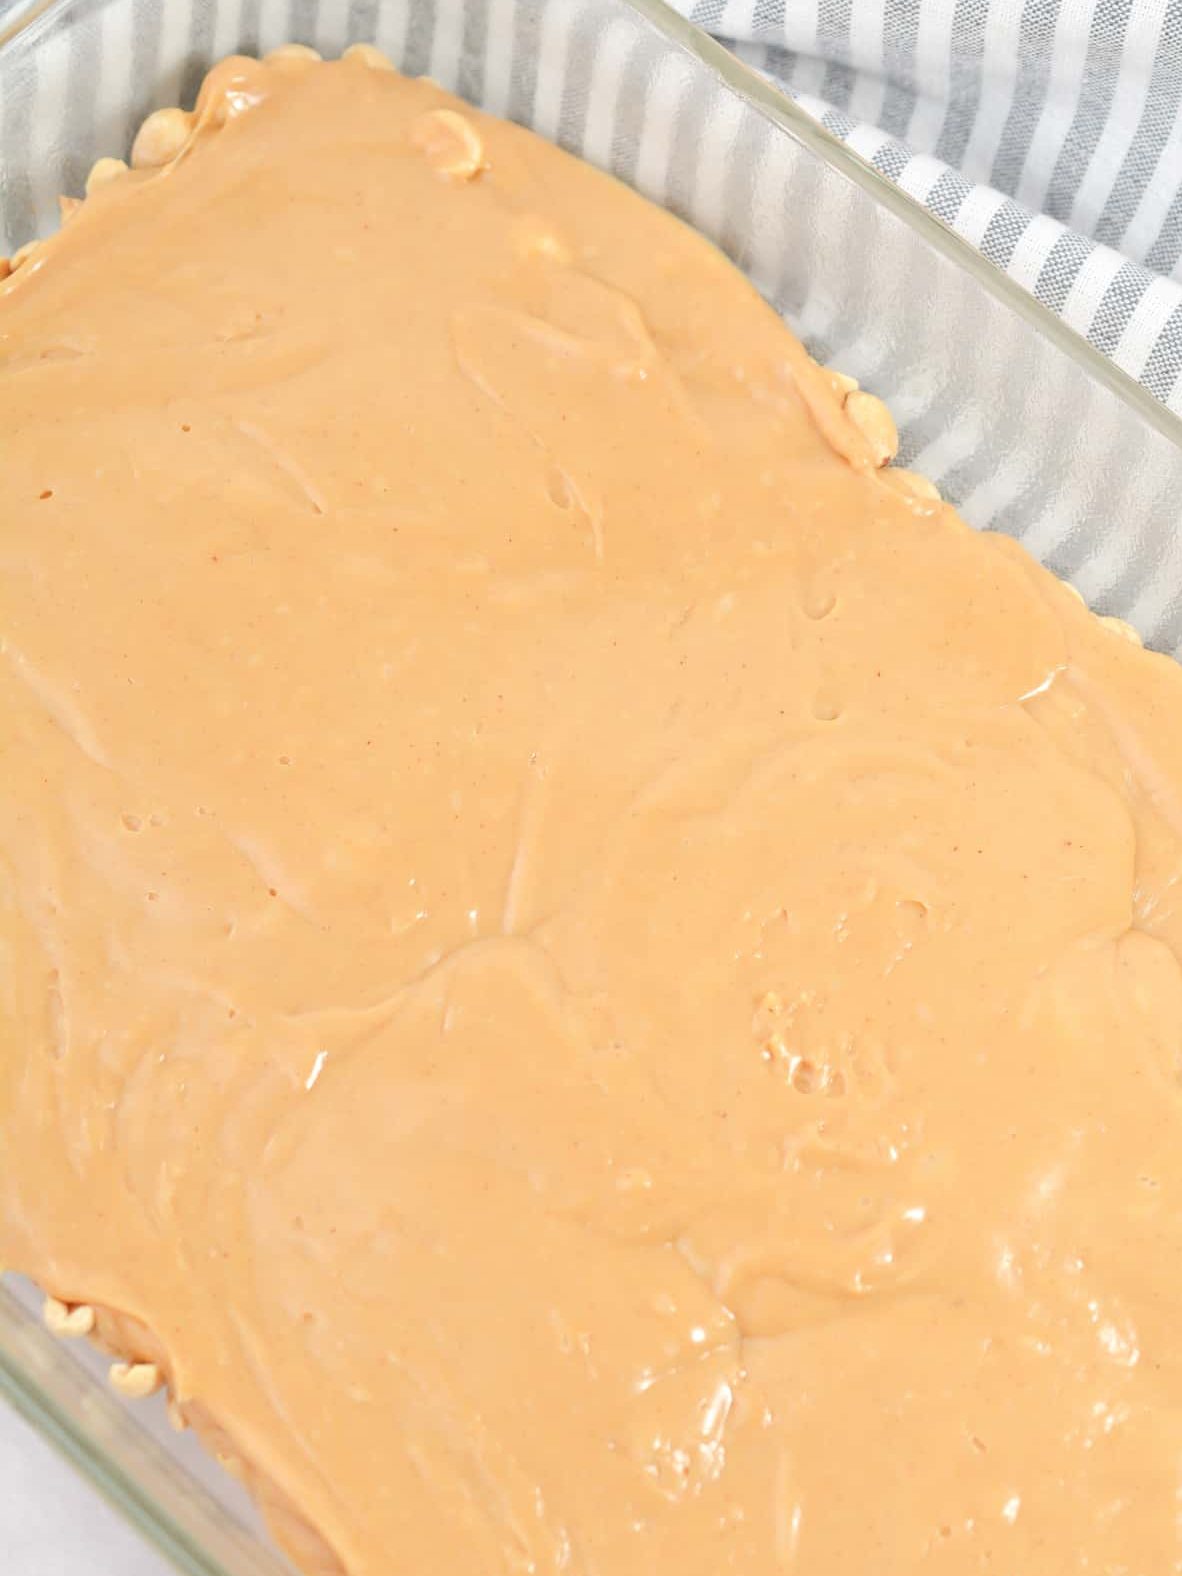 Pour the peanut butter chip mixture over the top of the peanuts in the baking dish, and smooth into an even layer.